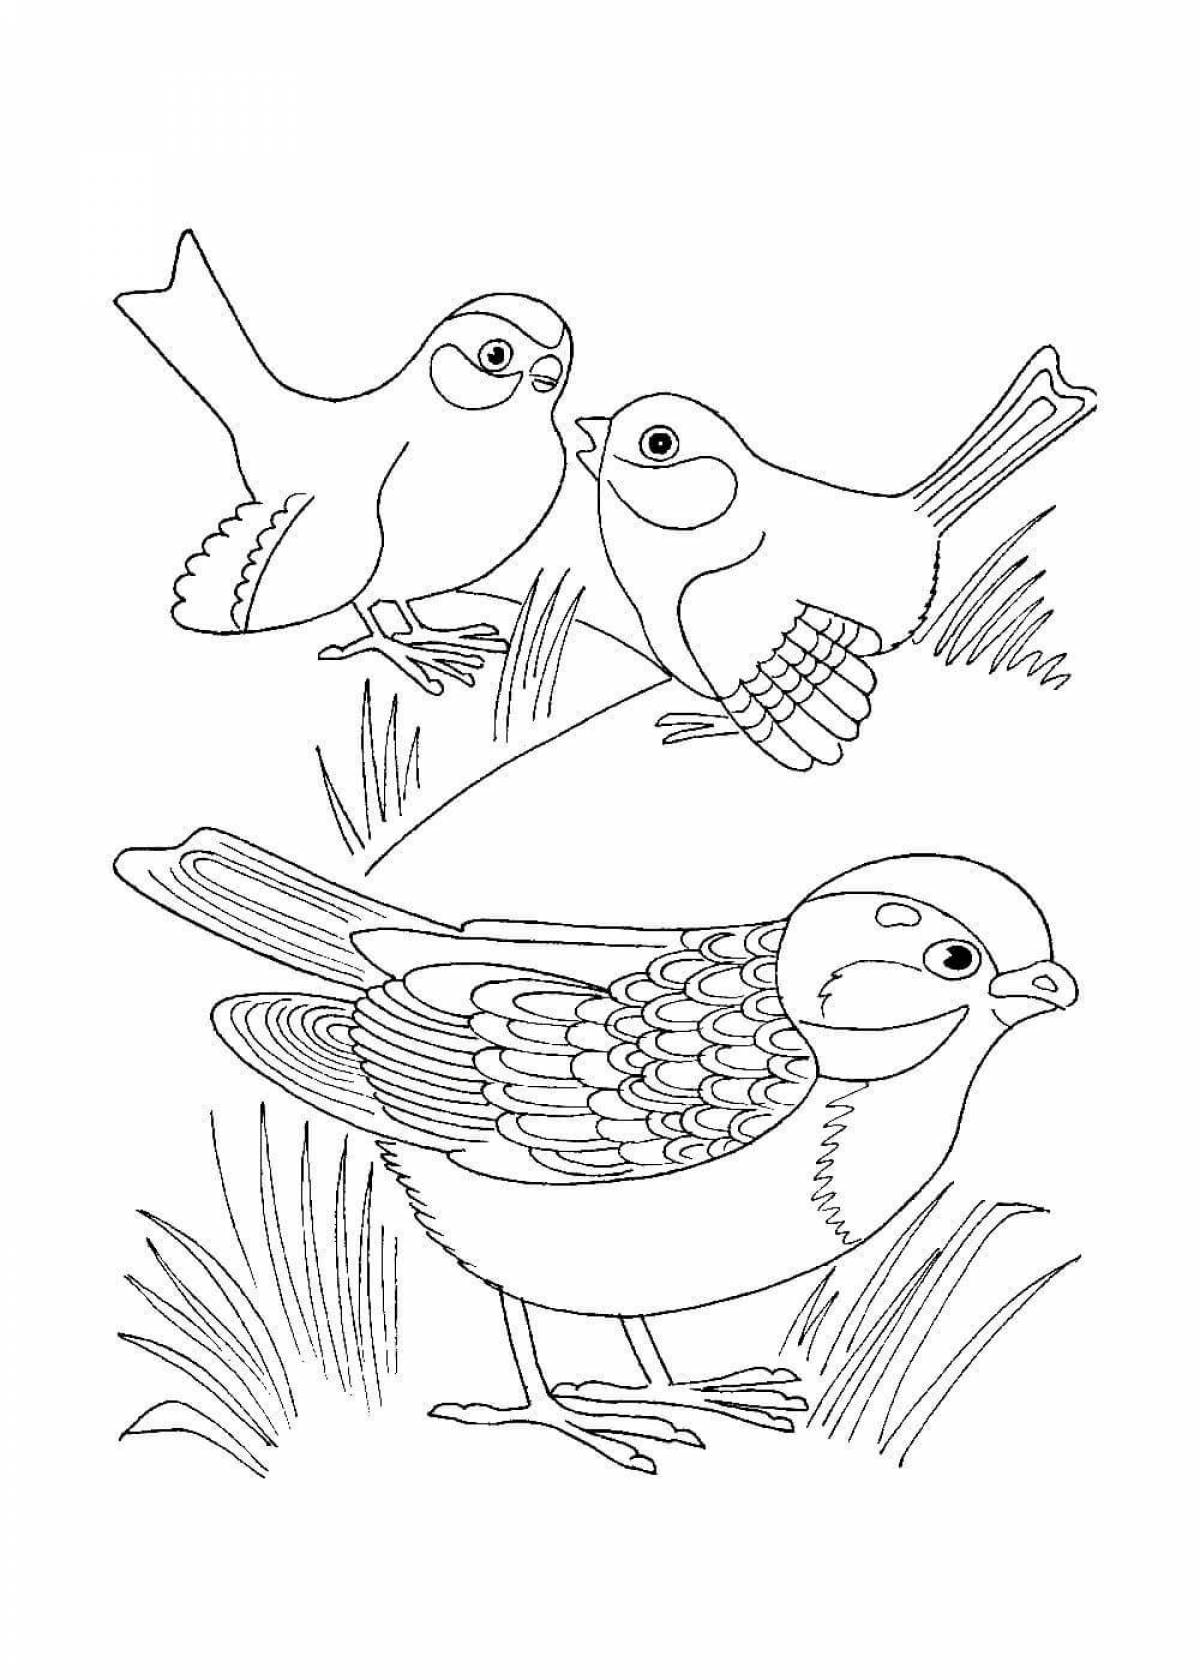 Majestic sparrow coloring book for kids